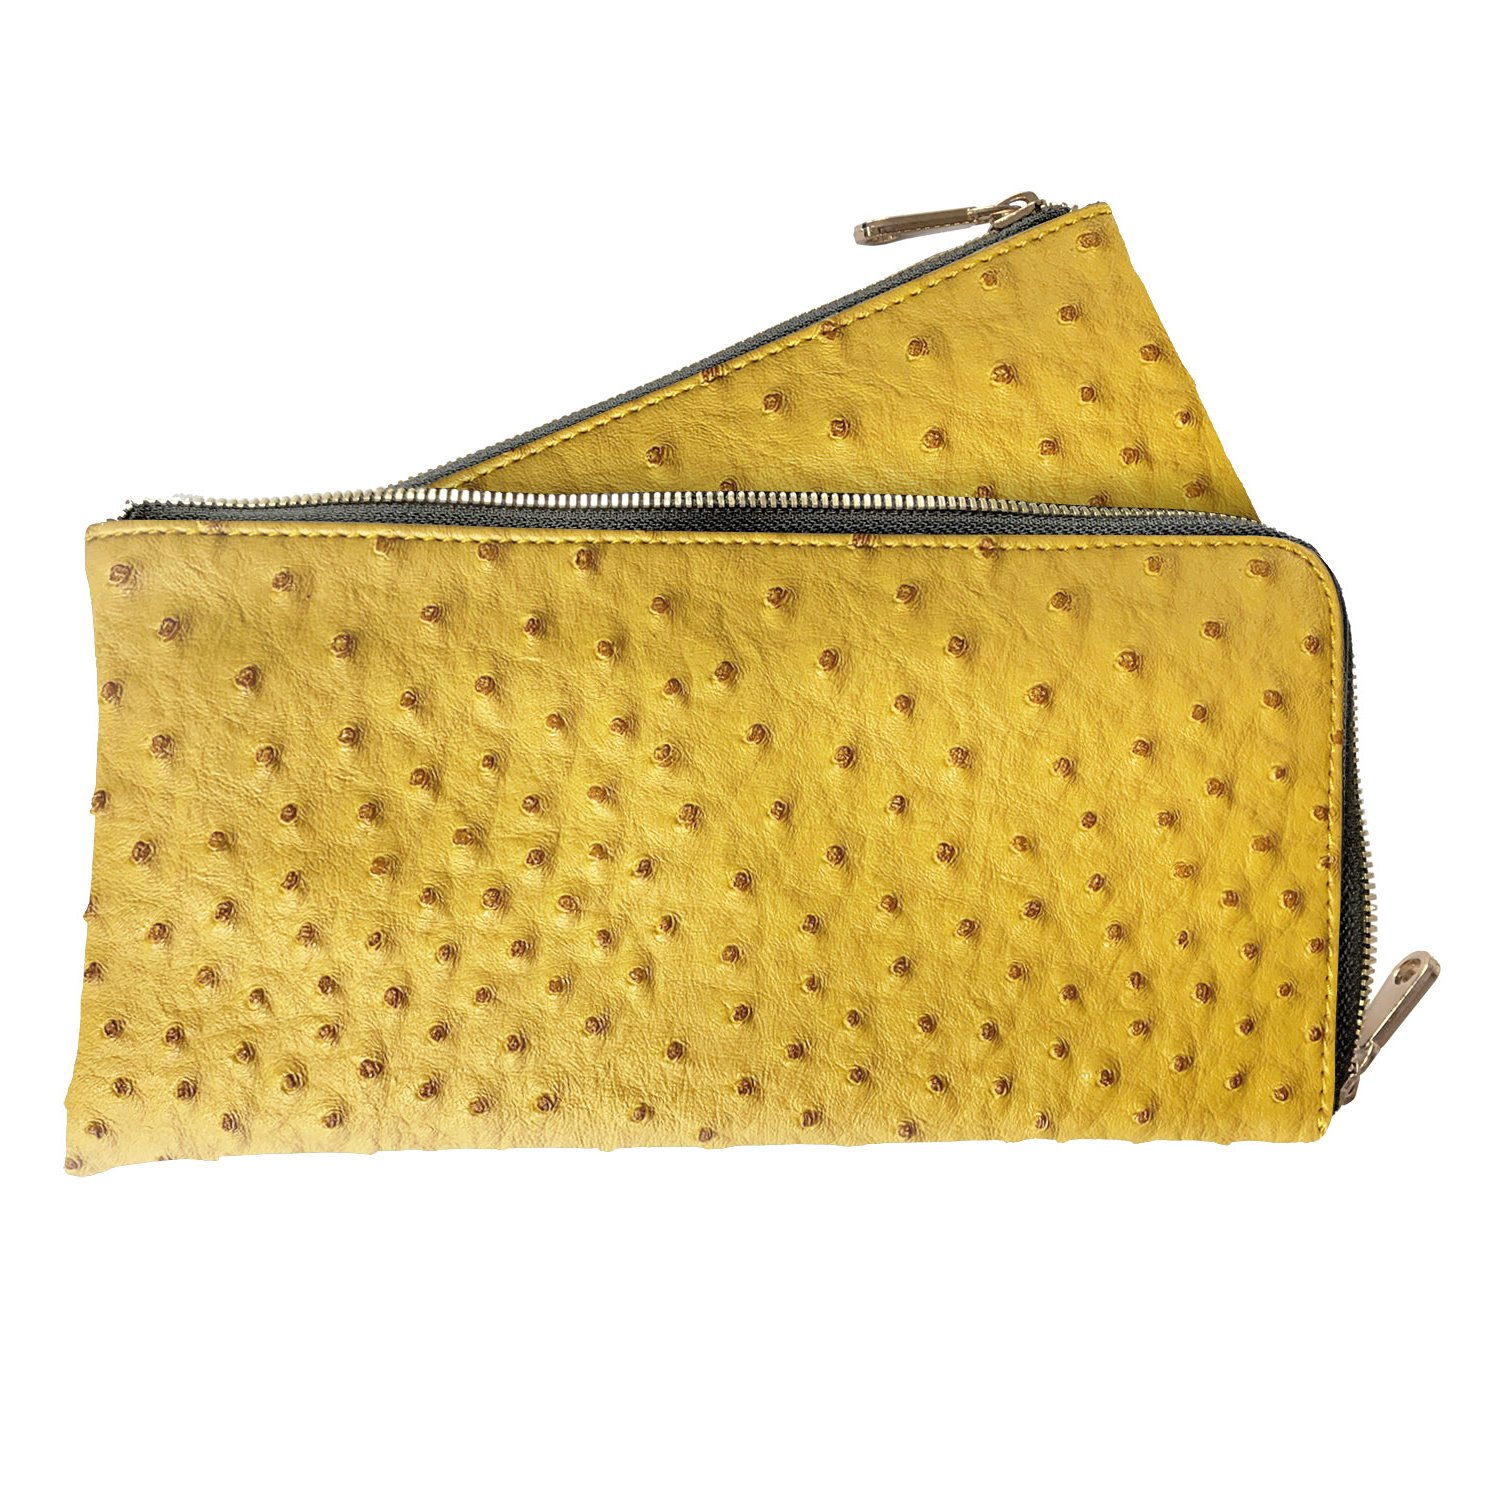 Image of Ostrich Vegan Leather Classic Purse Yellow